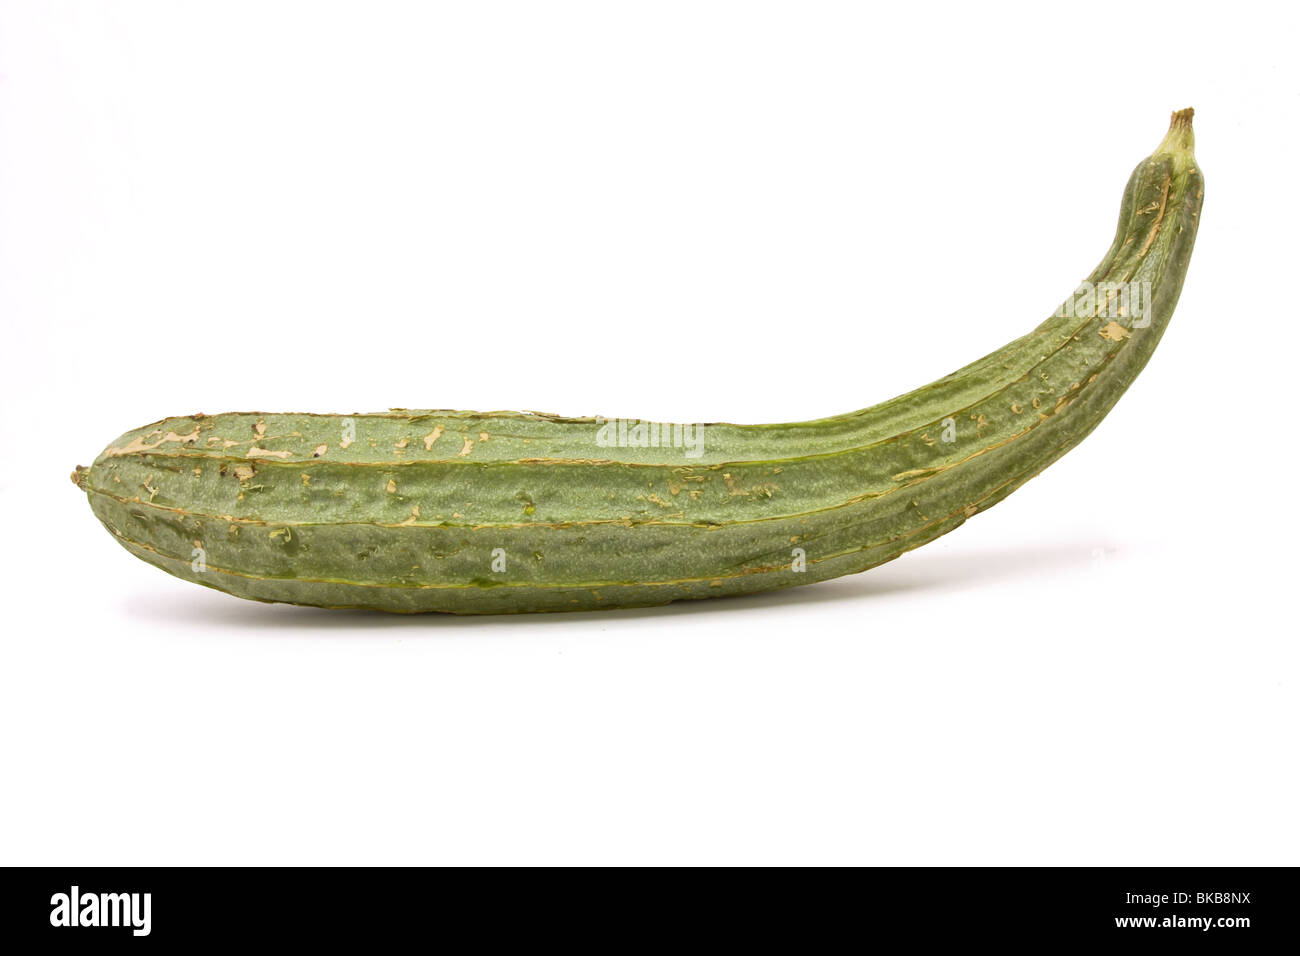 Raw Luffa Squash or Touria used in asian cooking or dried out to scrub your back. Stock Photo